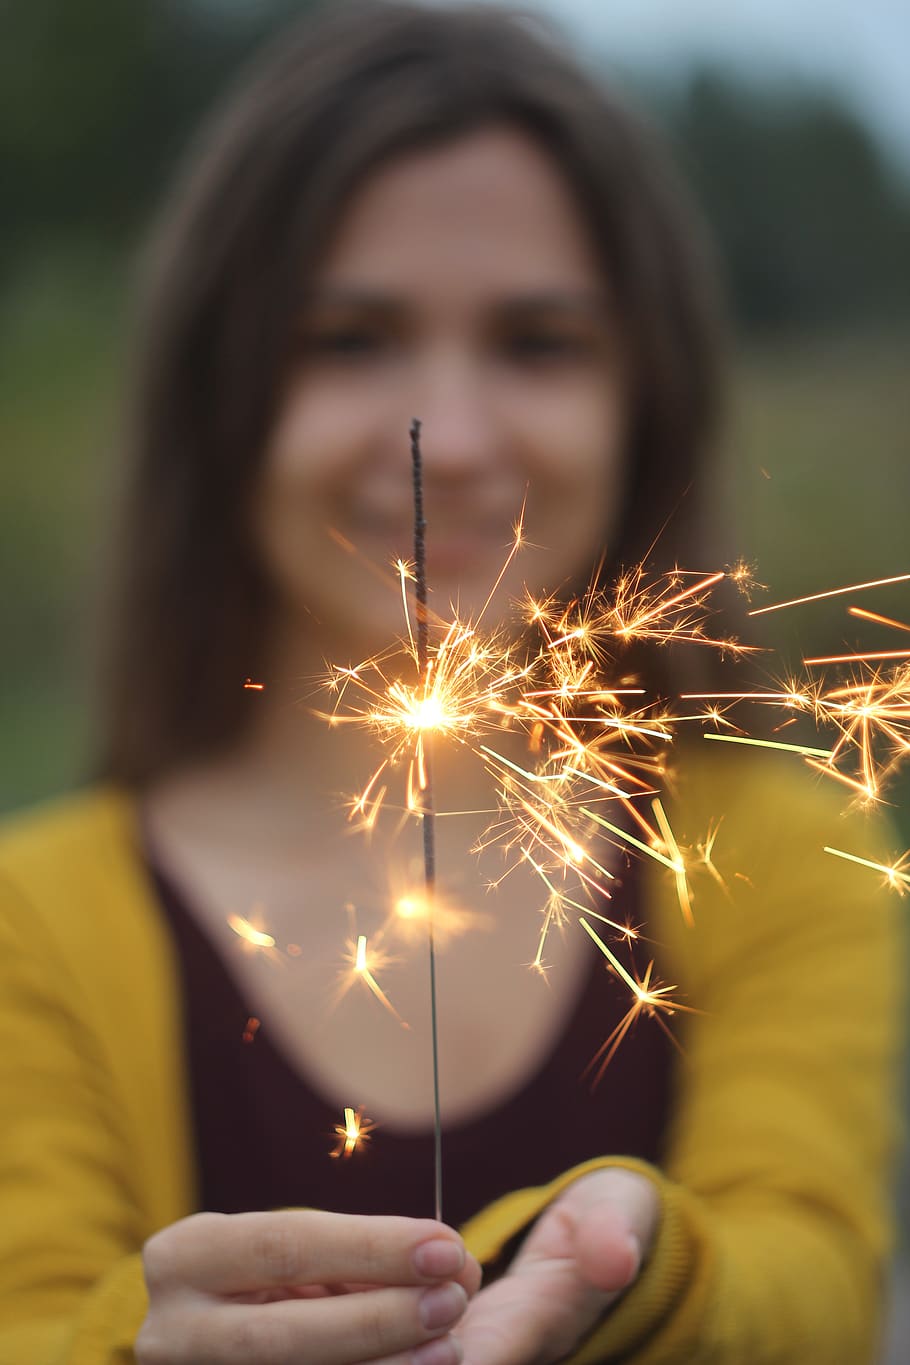 fire, spark, macro, evening, sunset, sparklers, yellow, orange, holiday, flame